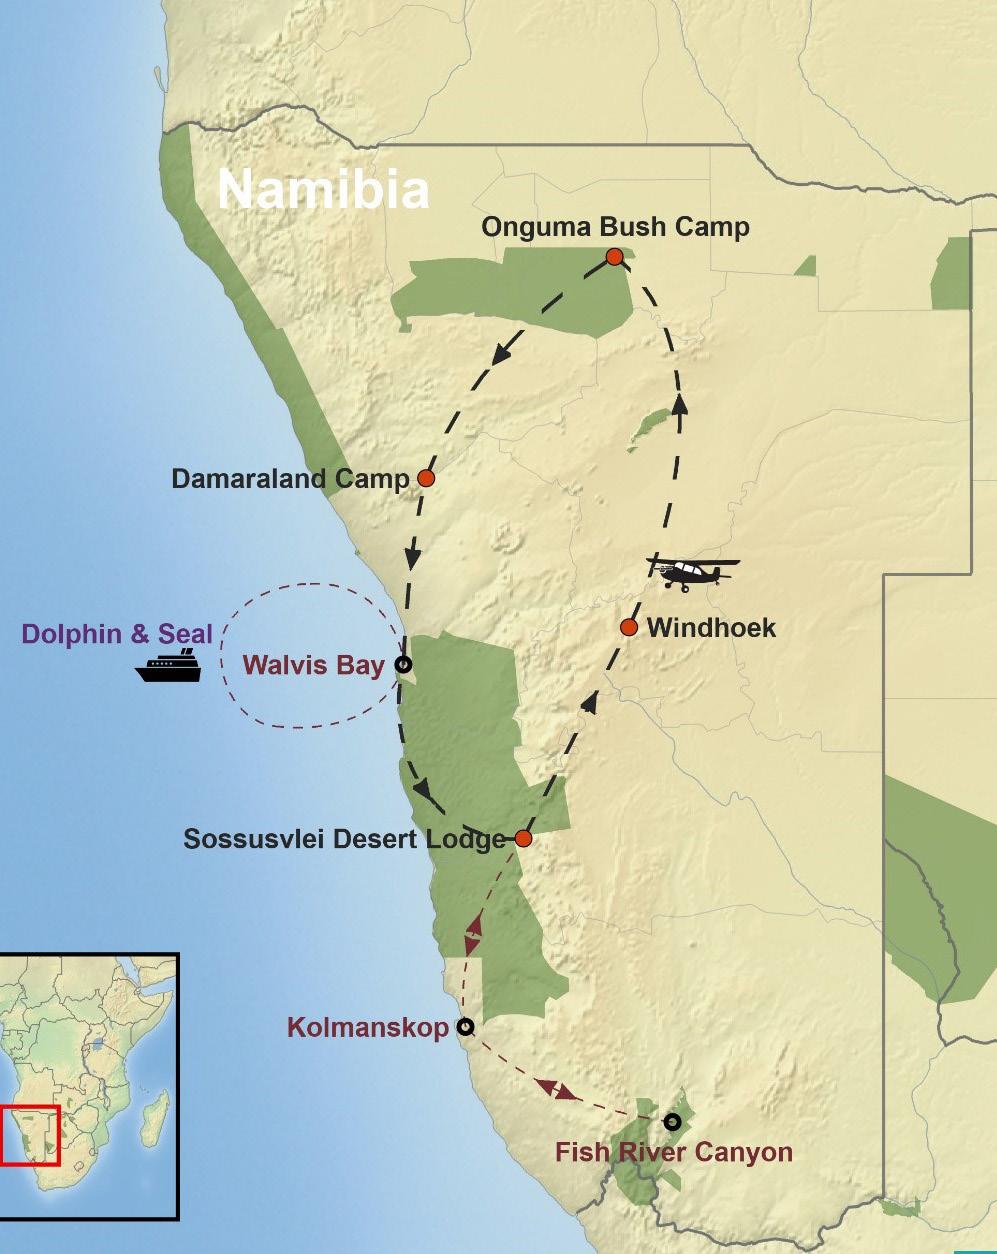 TOUR INFORMATION INTRODUCTION Namibia is a vast country, even by African standards, covering an area approximately four times the size of the United Kingdom but with a population of a mere 2 million